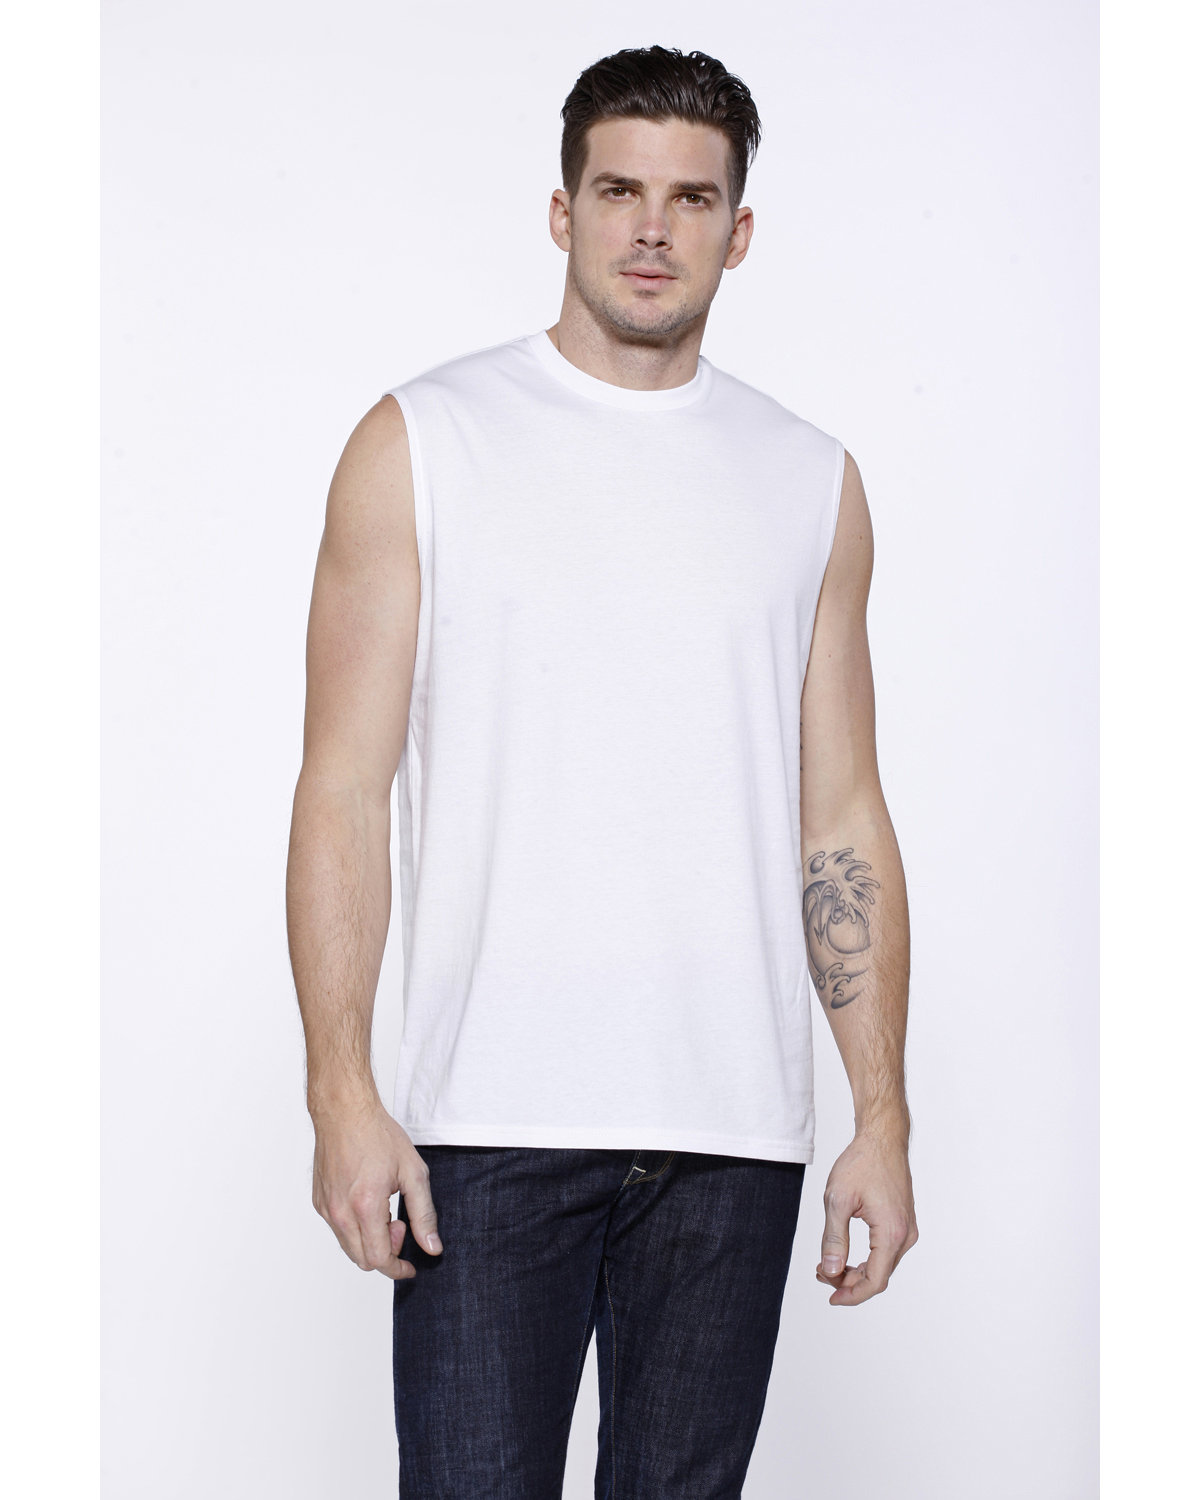 Buy Mens Cotton Muscle T-Shirt - StarTee Online at Best price - NY